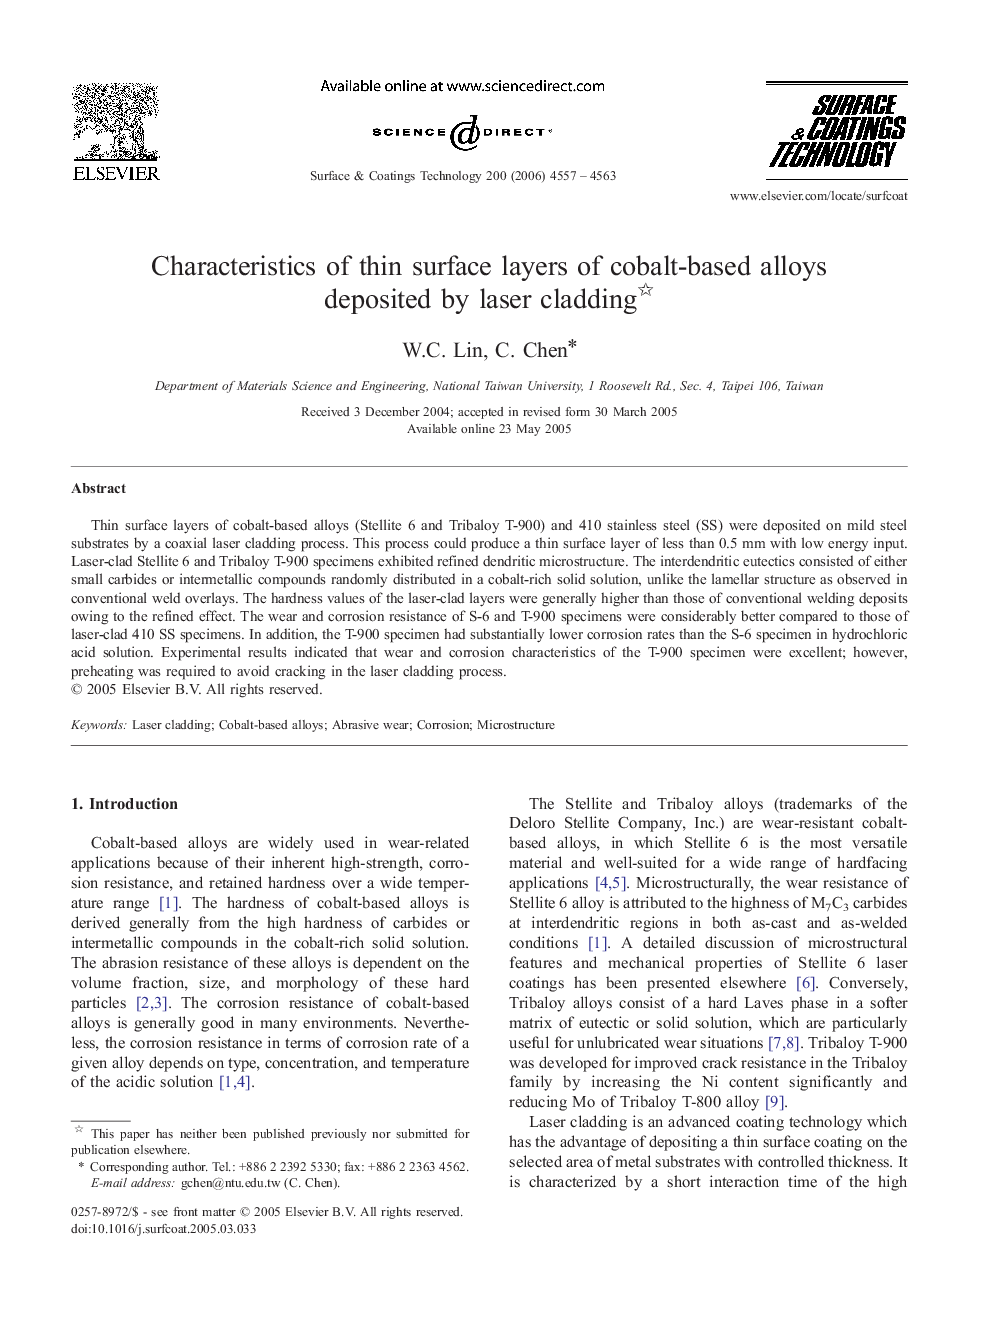 Characteristics of thin surface layers of cobalt-based alloys deposited by laser cladding 